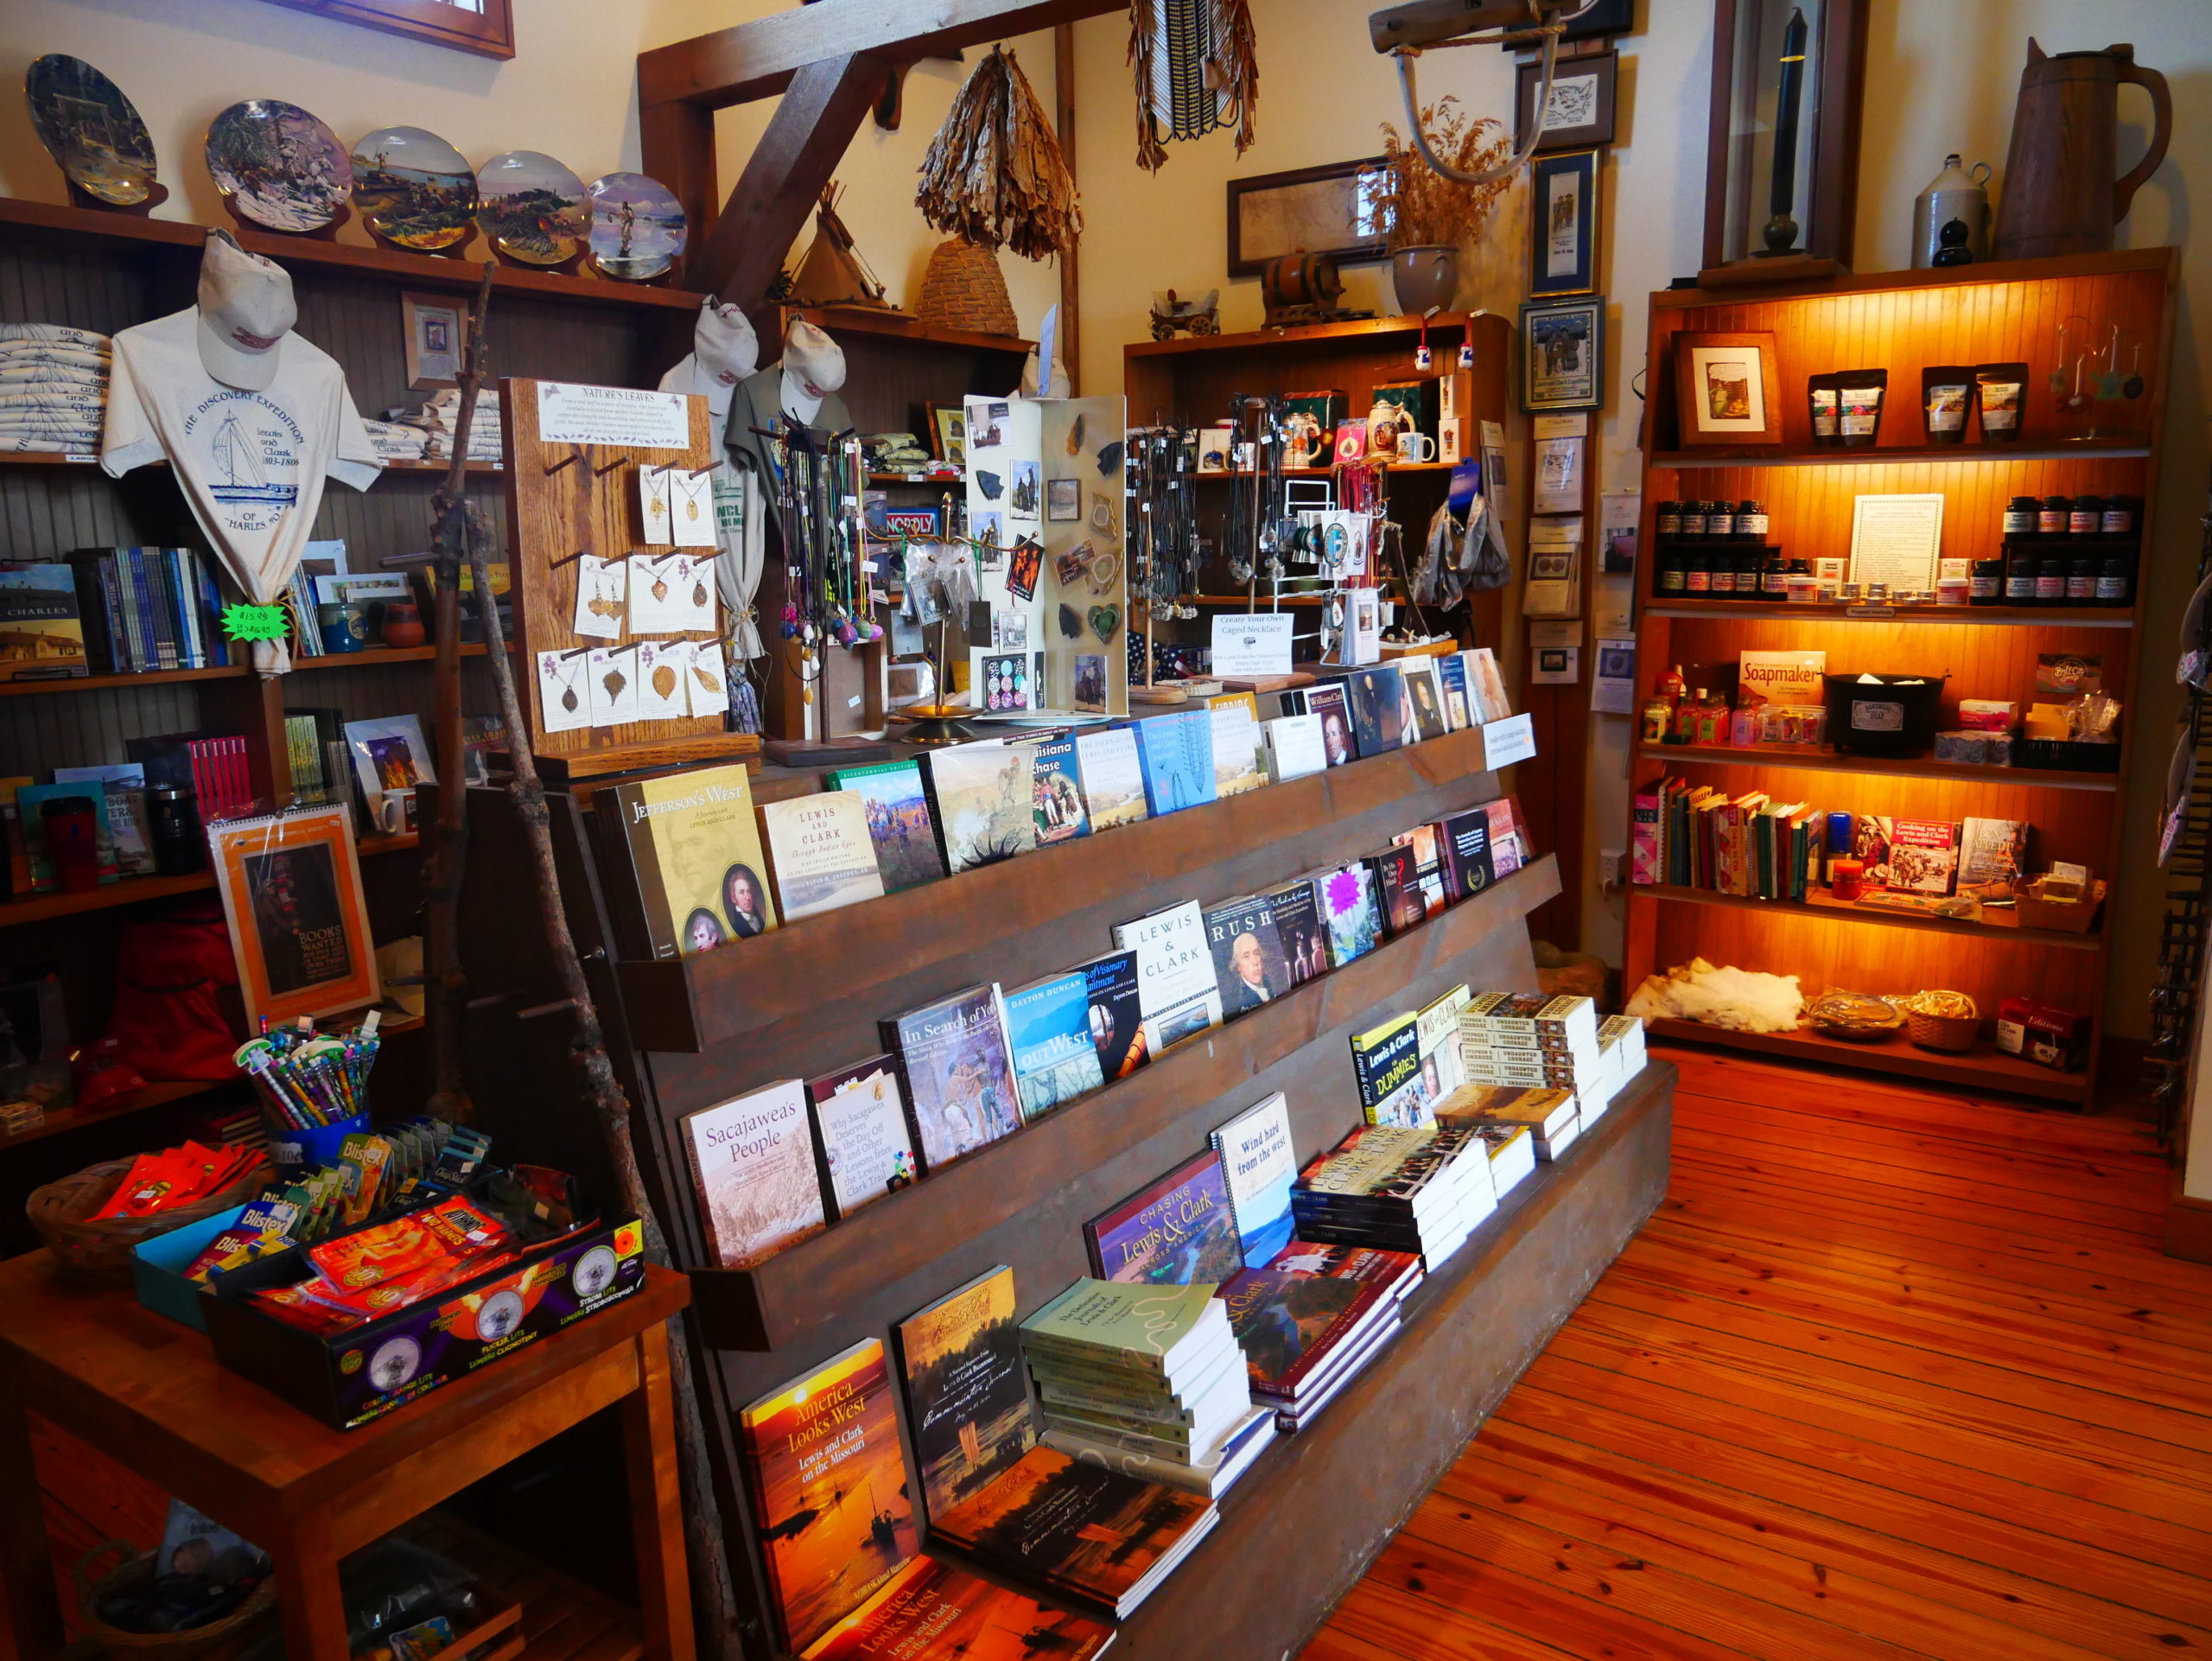 The museum shop has more than 100 books about history, including the Expedition